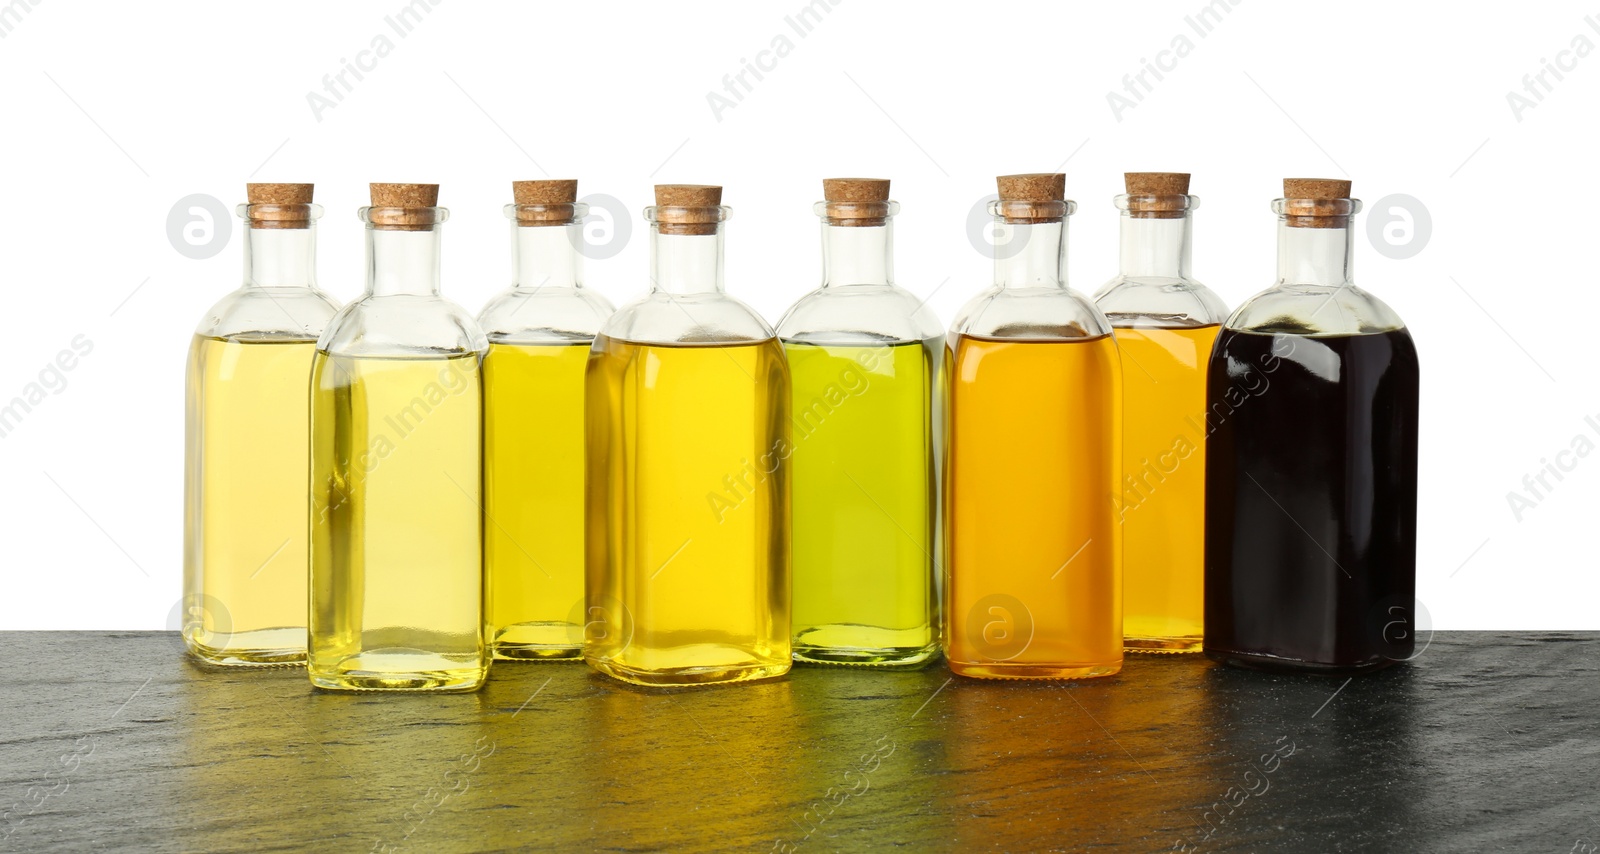 Photo of Vegetable fats. Bottles of different cooking oils on wooden table against white background